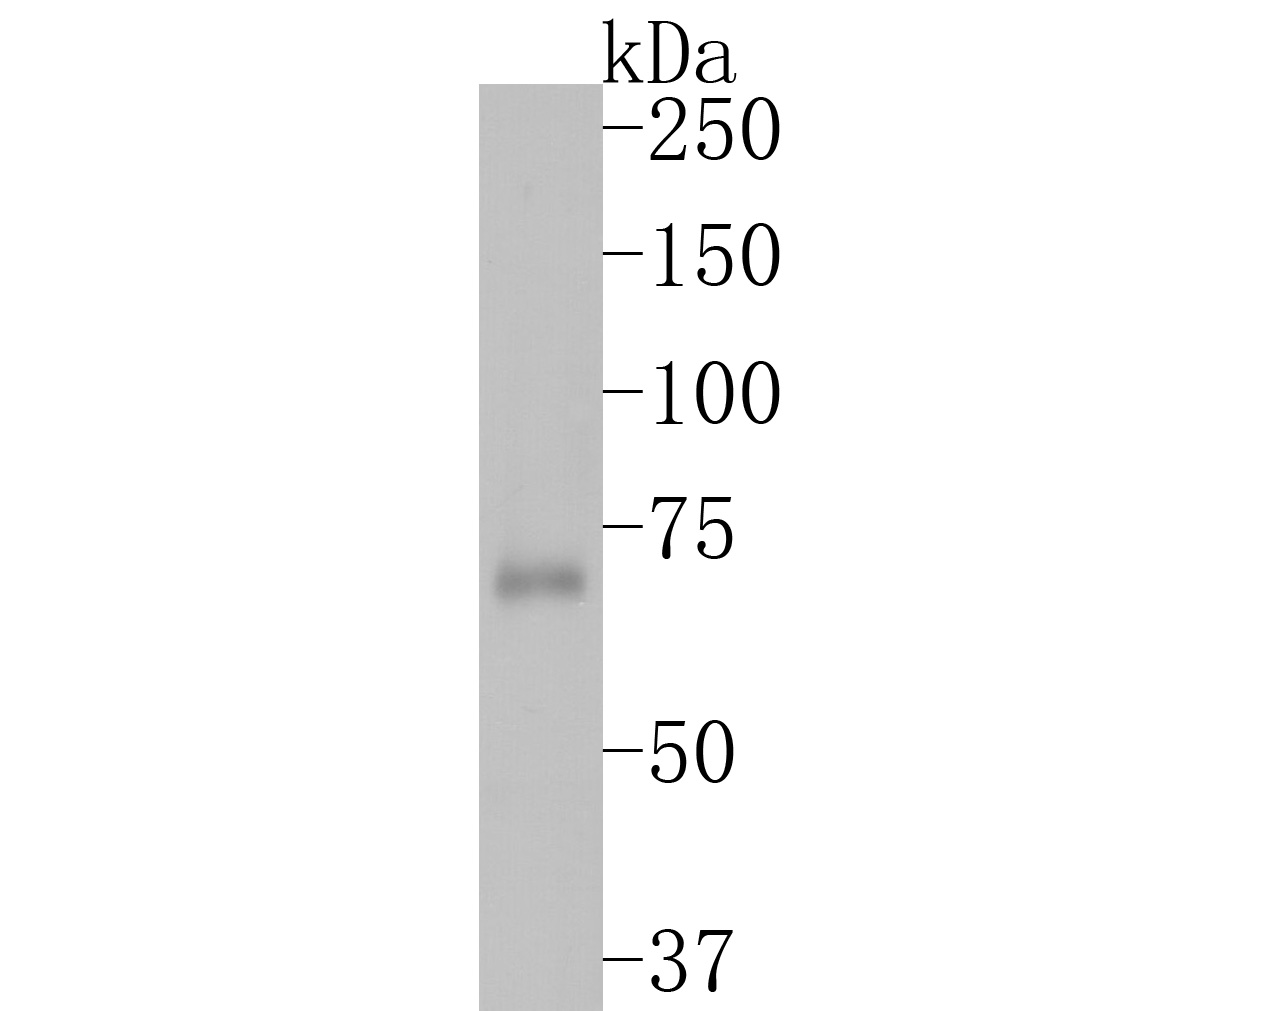 Western blot analysis of ATF2 on THP-1 cell lysates. Proteins were transferred to a PVDF membrane and blocked with 5% BSA in PBS for 1 hour at room temperature. The primary antibody (ET1603-15, 1/500) was used in 5% BSA at room temperature for 2 hours. Goat Anti-Rabbit IgG - HRP Secondary Antibody (HA1001) at 1:200,000 dilution was used for 1 hour at room temperature.